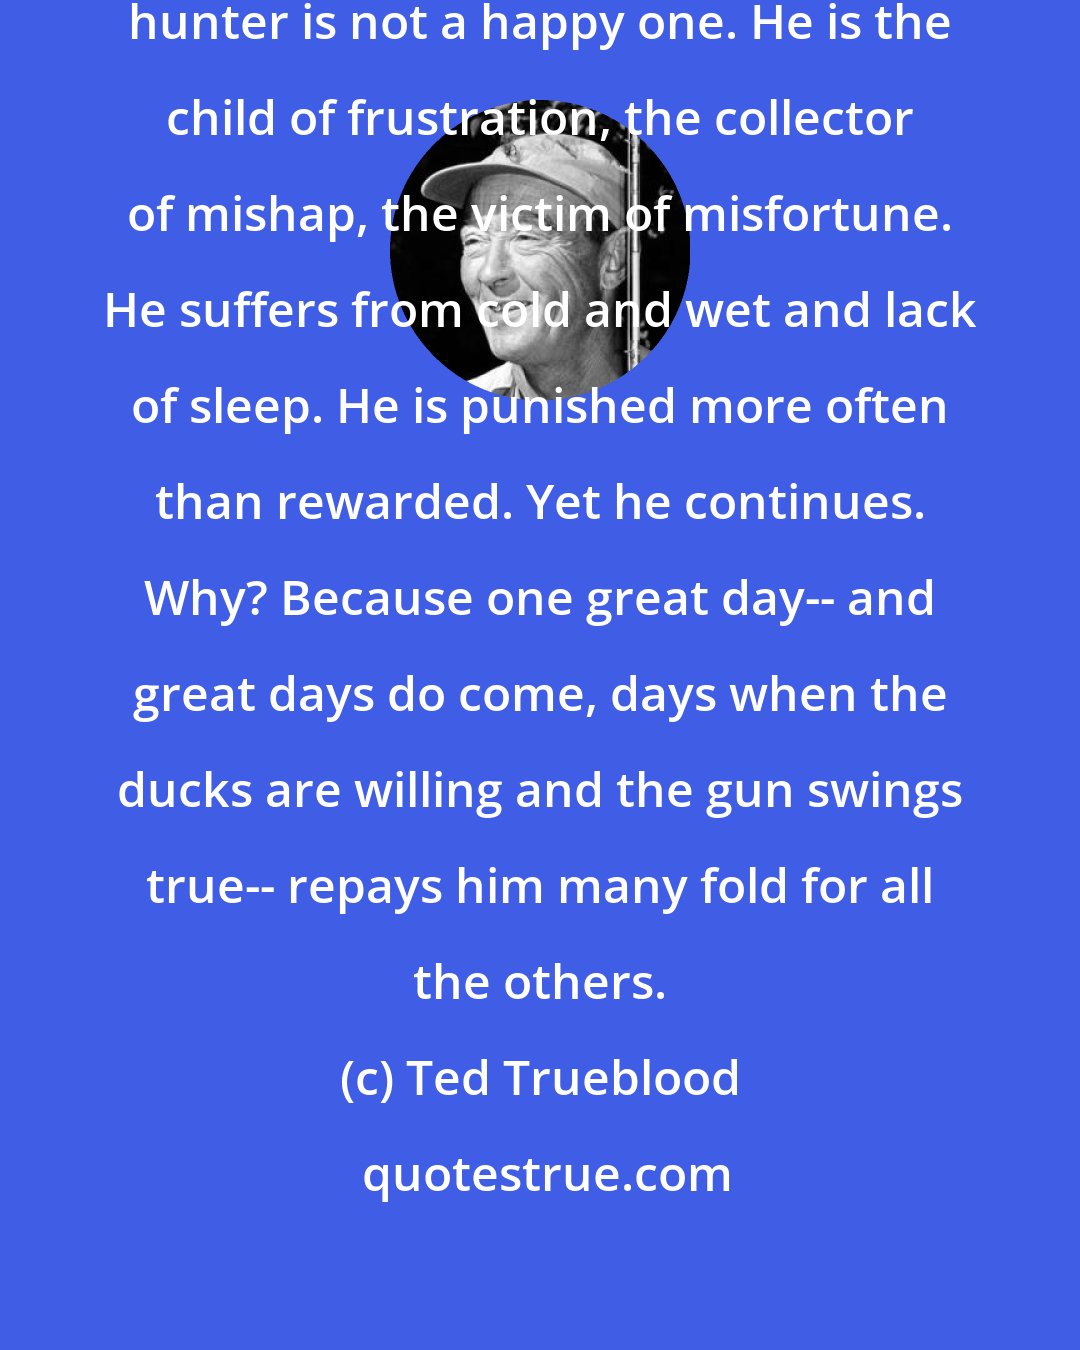 Ted Trueblood: Thus we see that the lot of the duck hunter is not a happy one. He is the child of frustration, the collector of mishap, the victim of misfortune. He suffers from cold and wet and lack of sleep. He is punished more often than rewarded. Yet he continues. Why? Because one great day-- and great days do come, days when the ducks are willing and the gun swings true-- repays him many fold for all the others.